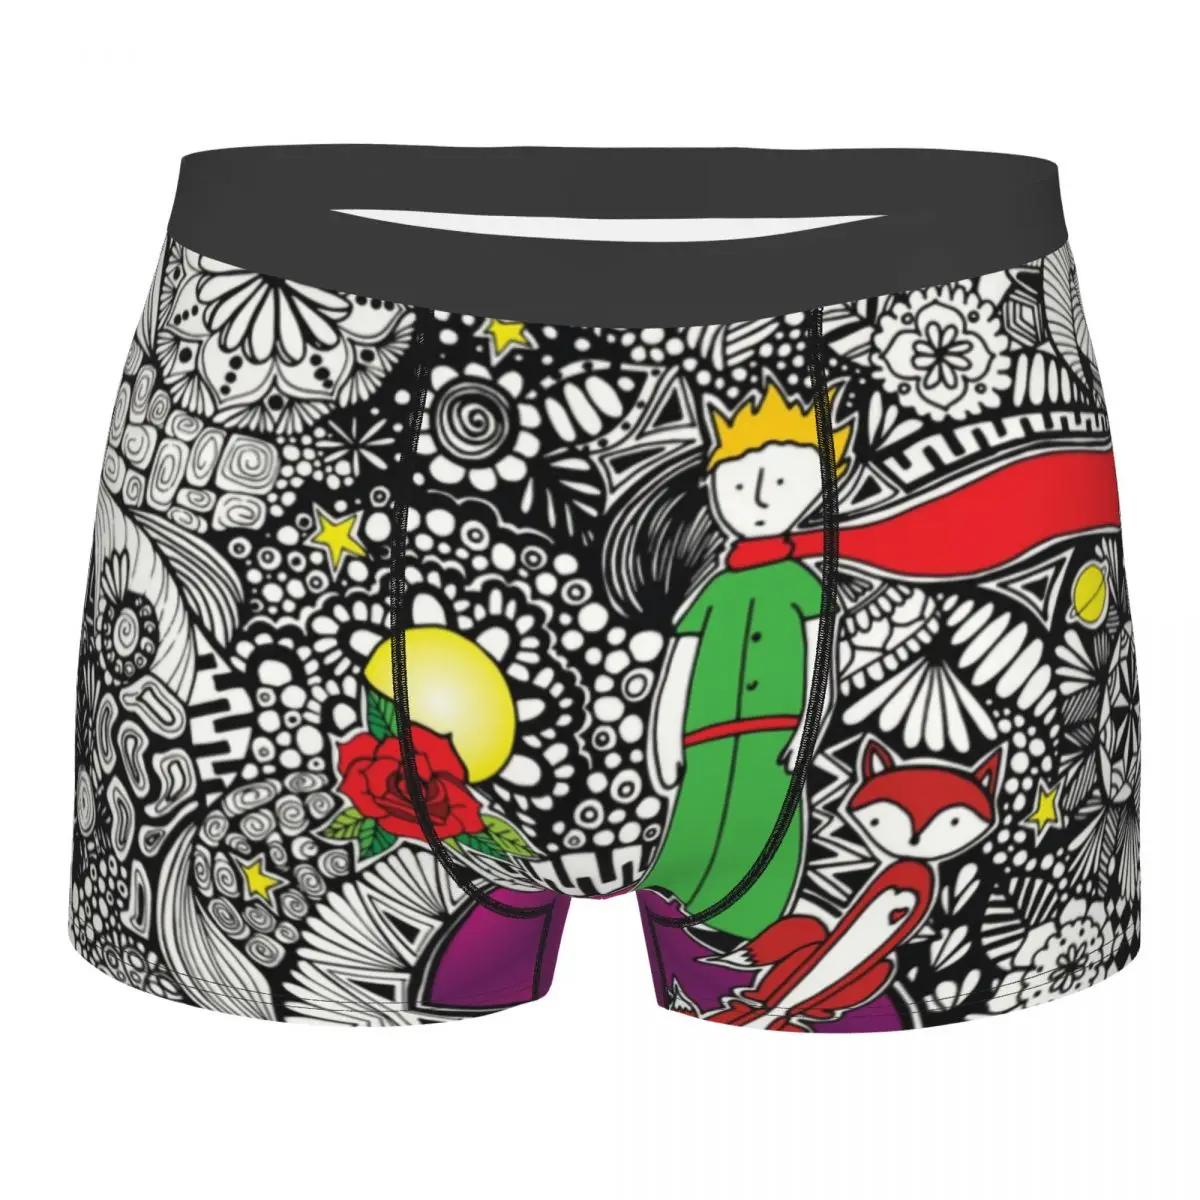 

Funny The Little Prince Fairy Tale Boxers Shorts Panties Male Underpants Breathable France Fantasy Fiction Briefs Underwear